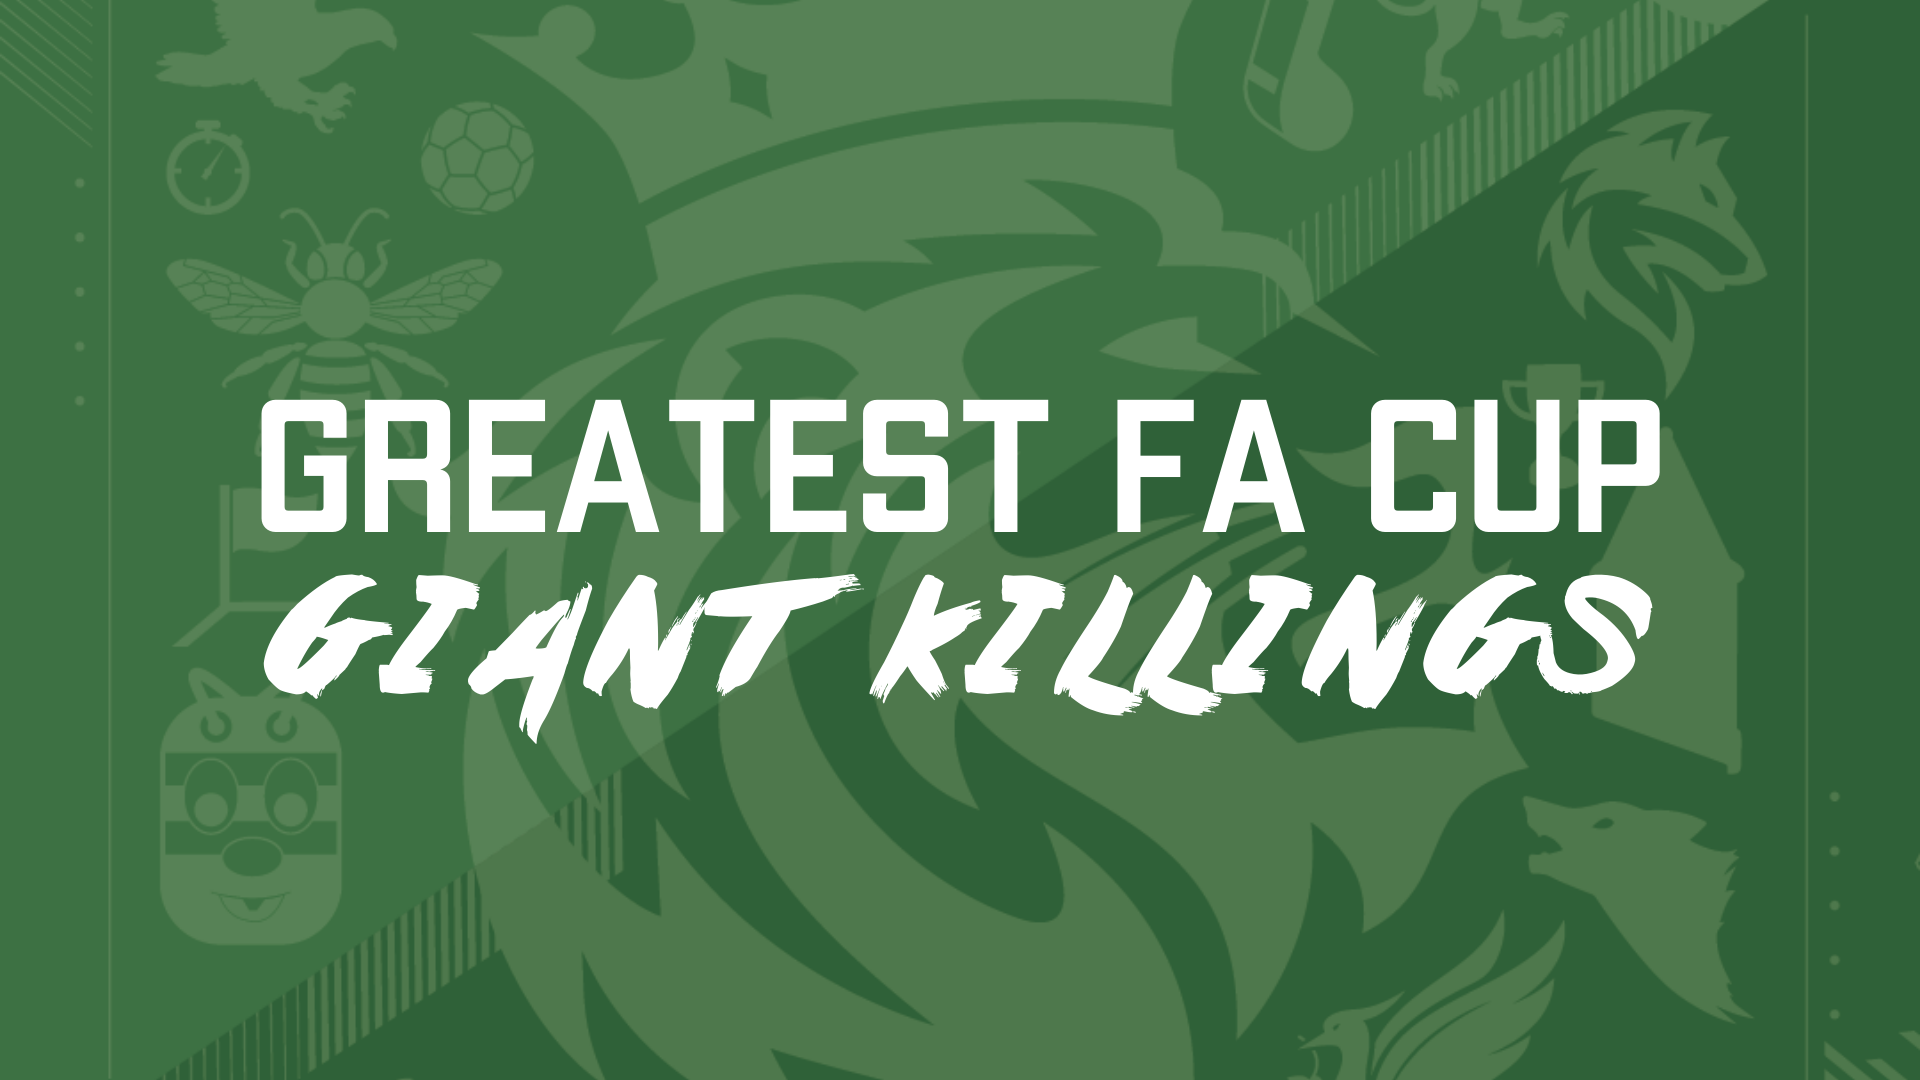 5 of the best FA Cup Giant Killings since 2012